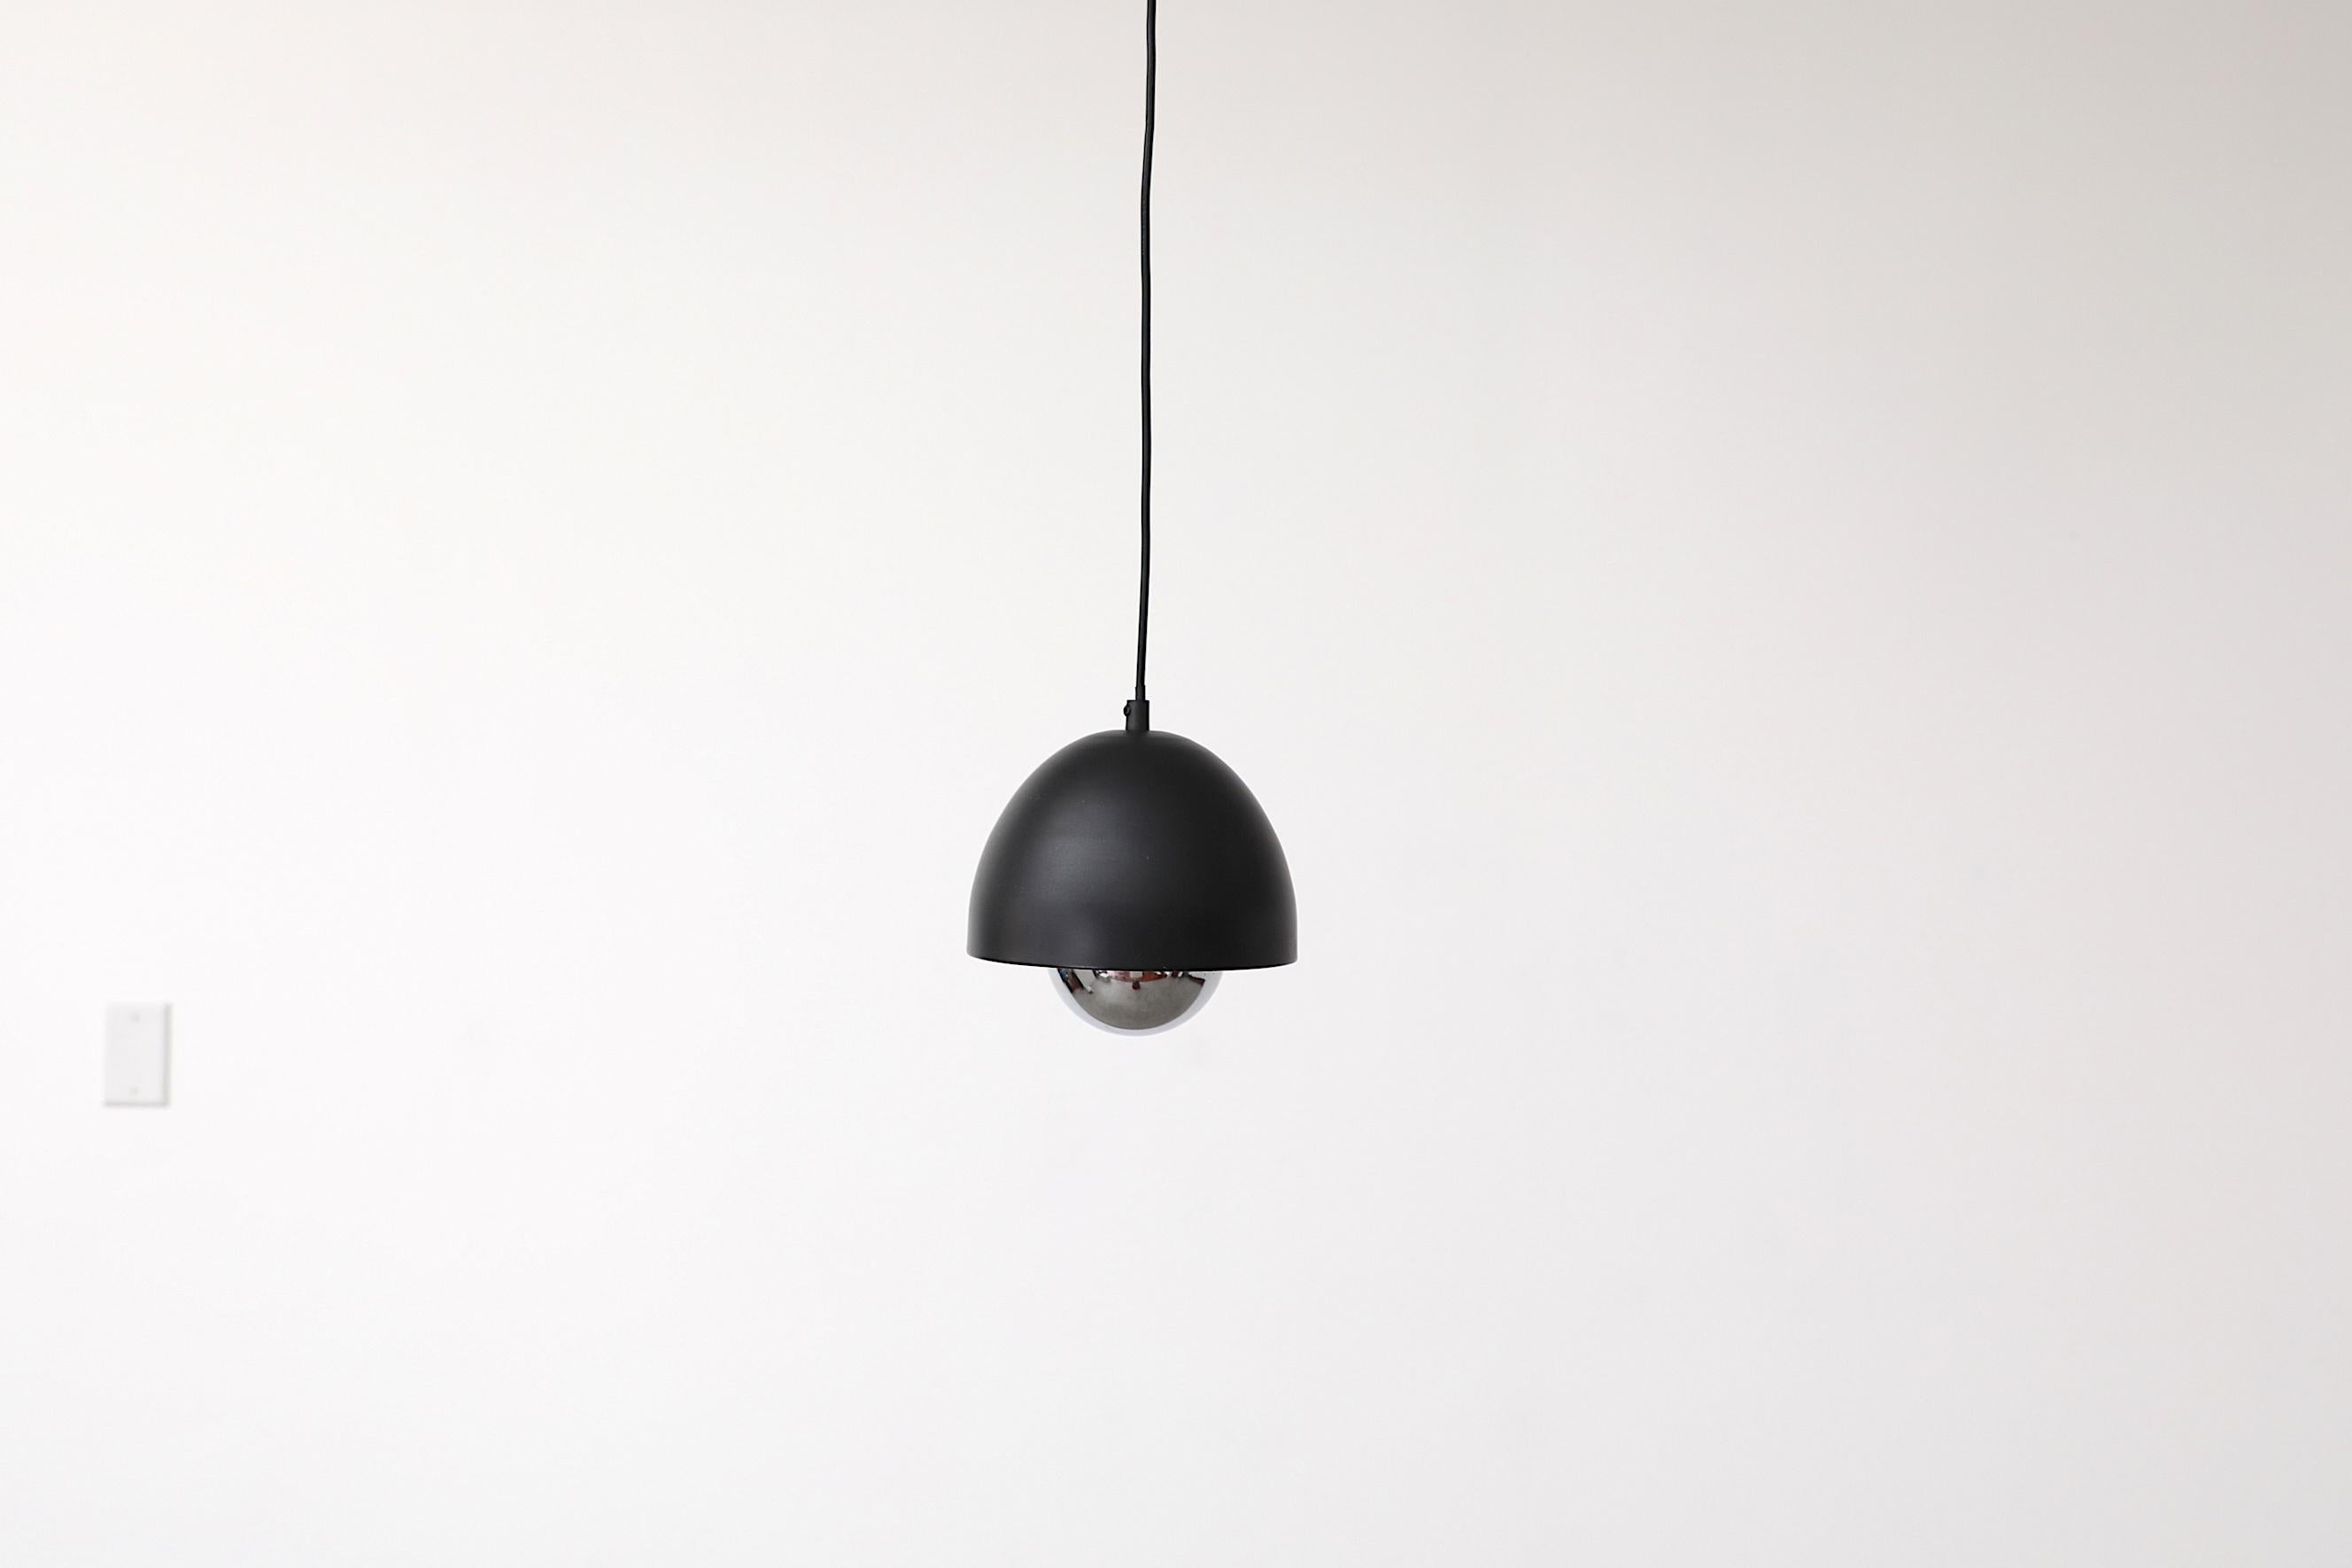 Cute little Poulsen style pendant light. Shade is matte black and dome shaped, chrome diffuser is suspended in the center underneath the bulb. In original condition with visible wear, including scratches. Wear is consistent with its age and use. 